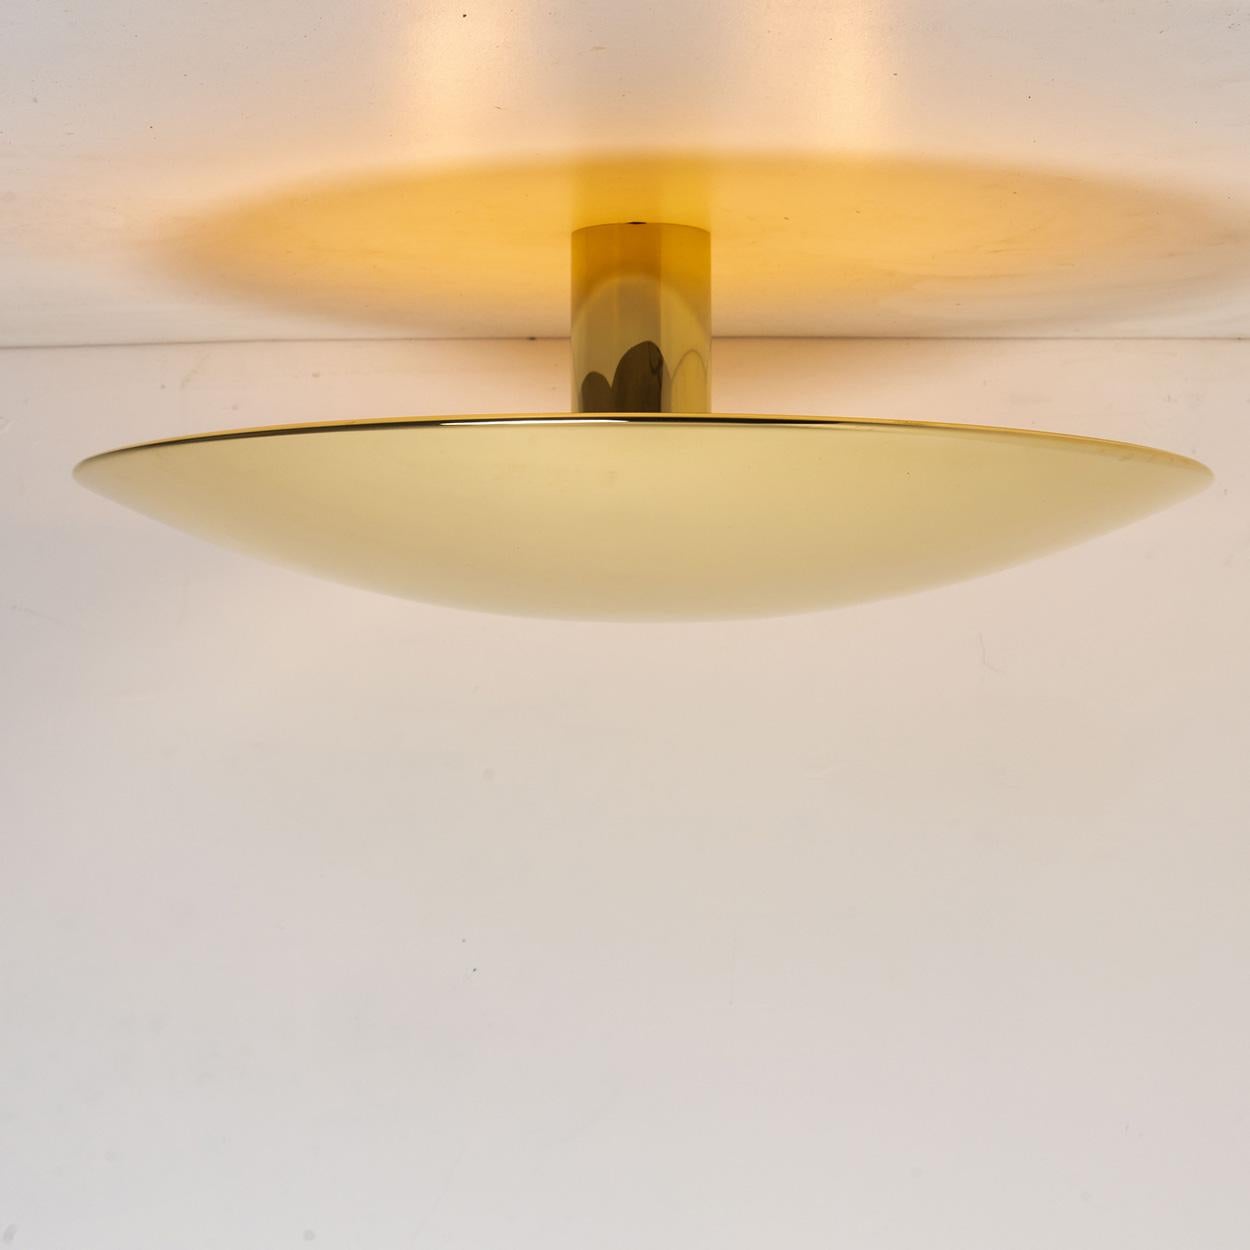 1 of the 2 Large Florian Schulz Brass Flushmount Ceiling /Wall Lights, 1970 For Sale 3